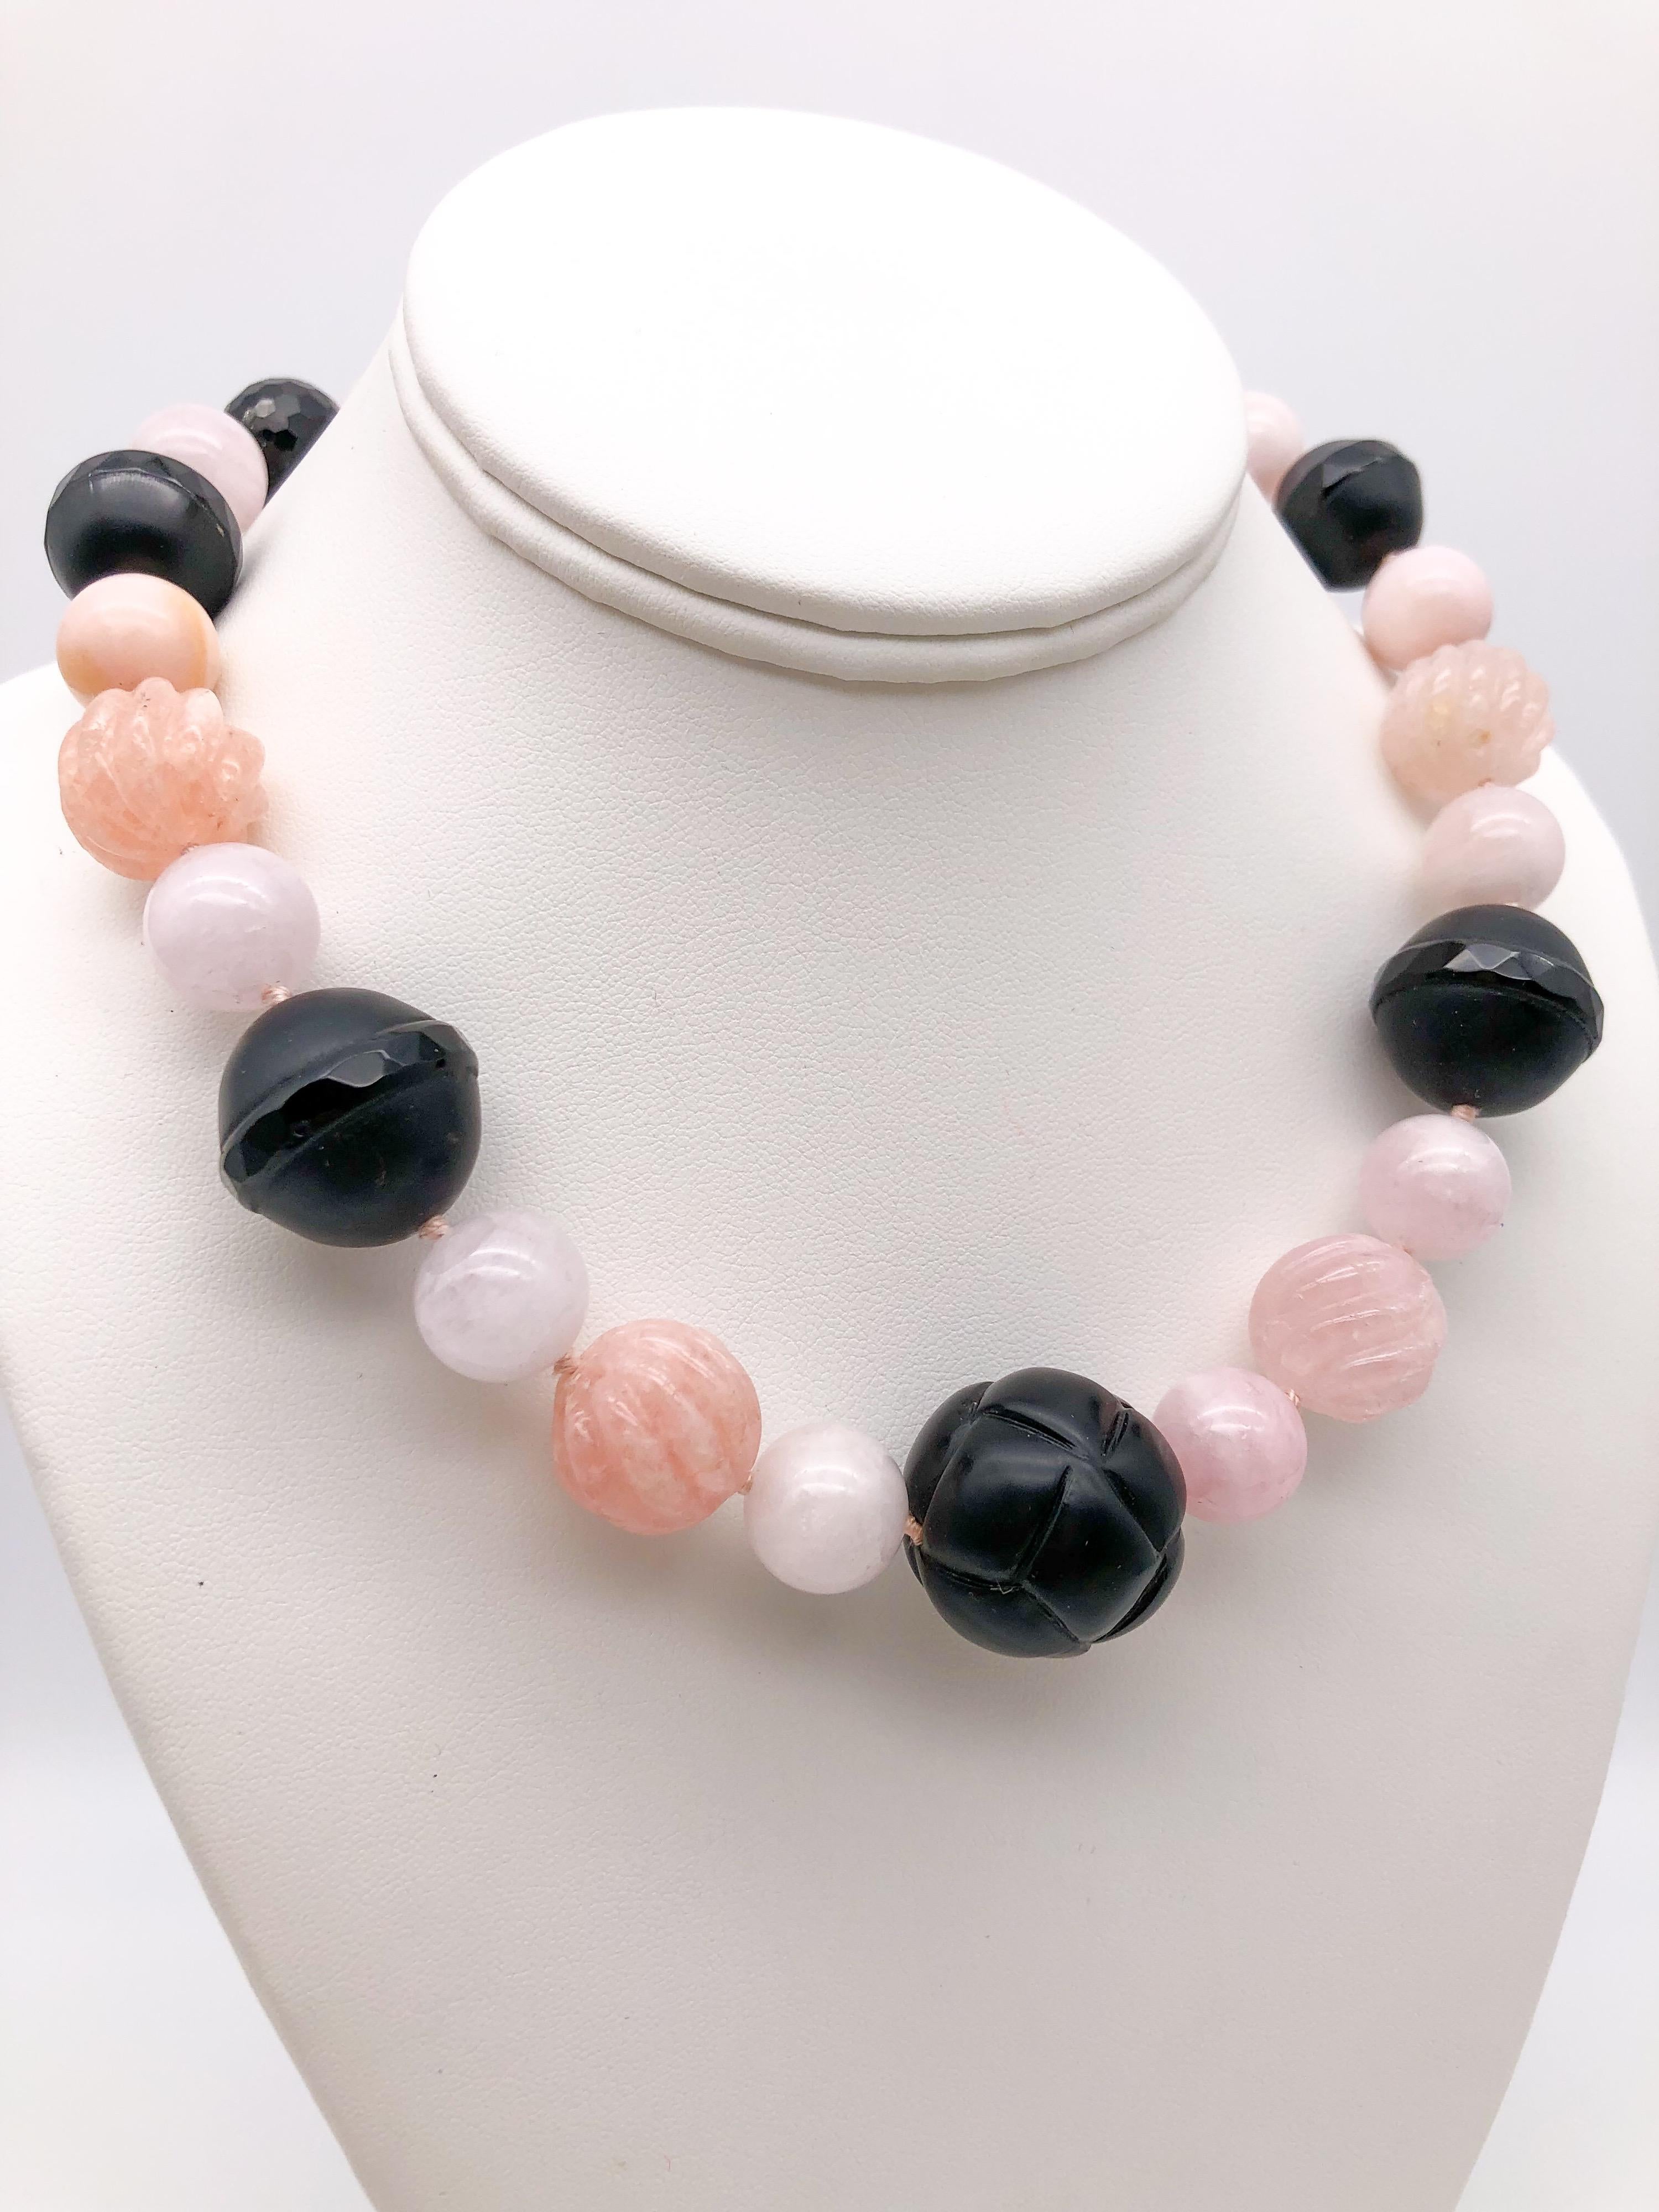 Prepare to be captivated by the understated elegance of this one-of-a-kind necklace. At first glance, you may mistake the delicate pink beads for the familiar Rose Quartz, but they are, in fact, the exquisite Morganite and Rose Opals. Morganite,